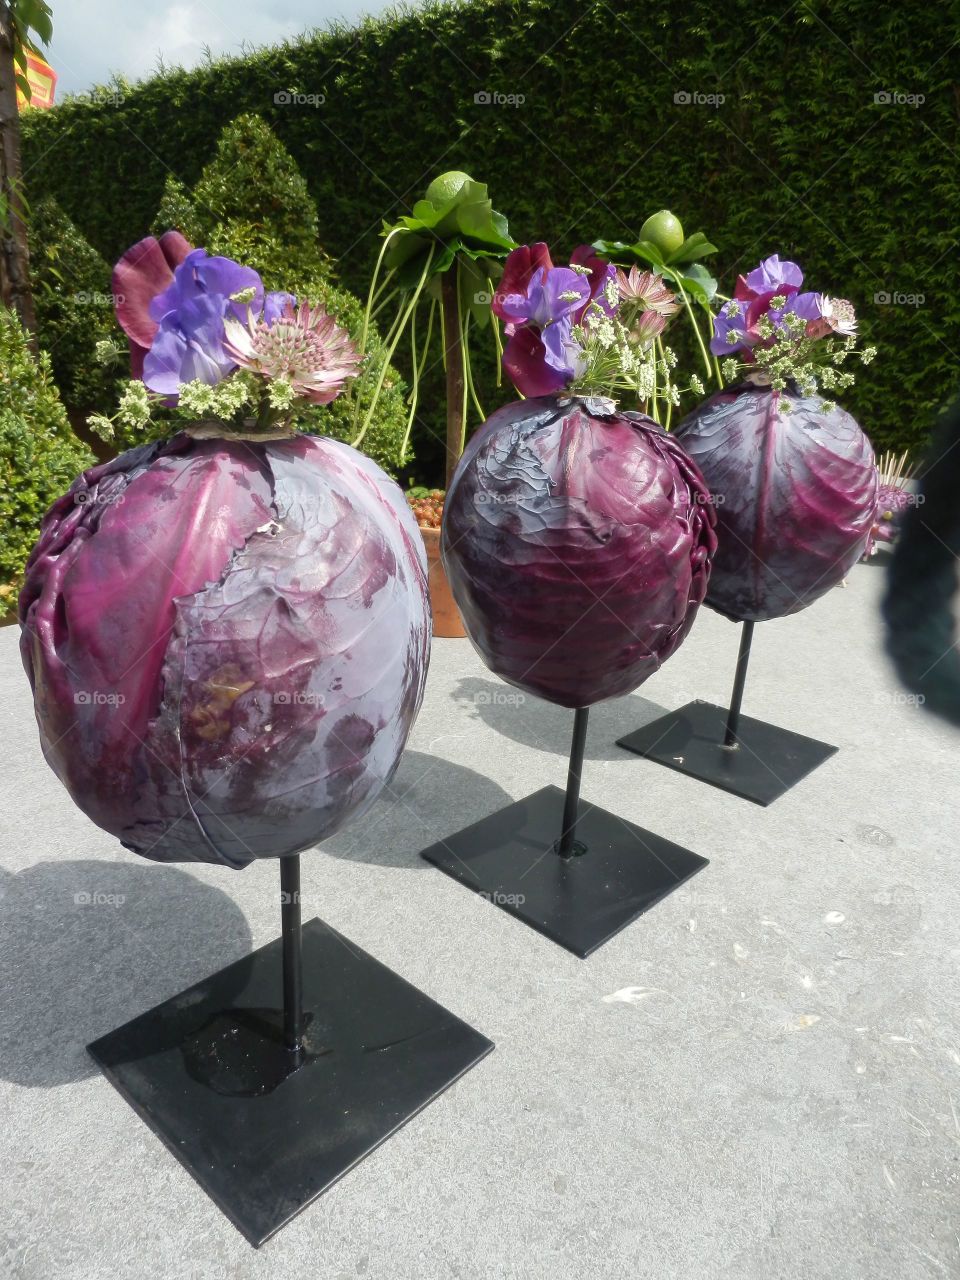 Cabbage and flowers